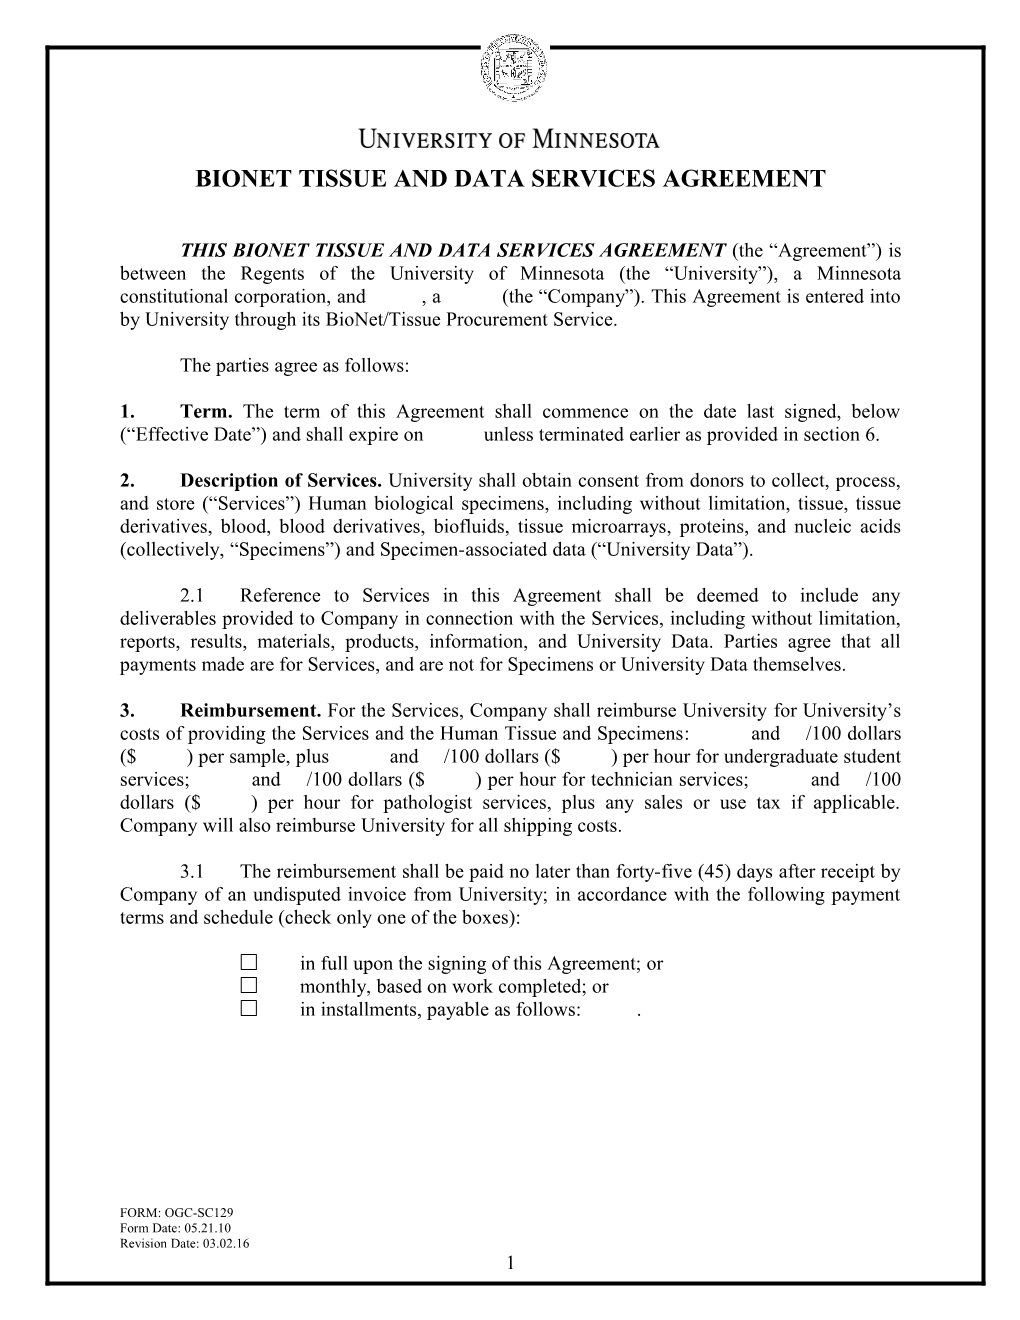 Bionet Tissue and Data Services Agreement